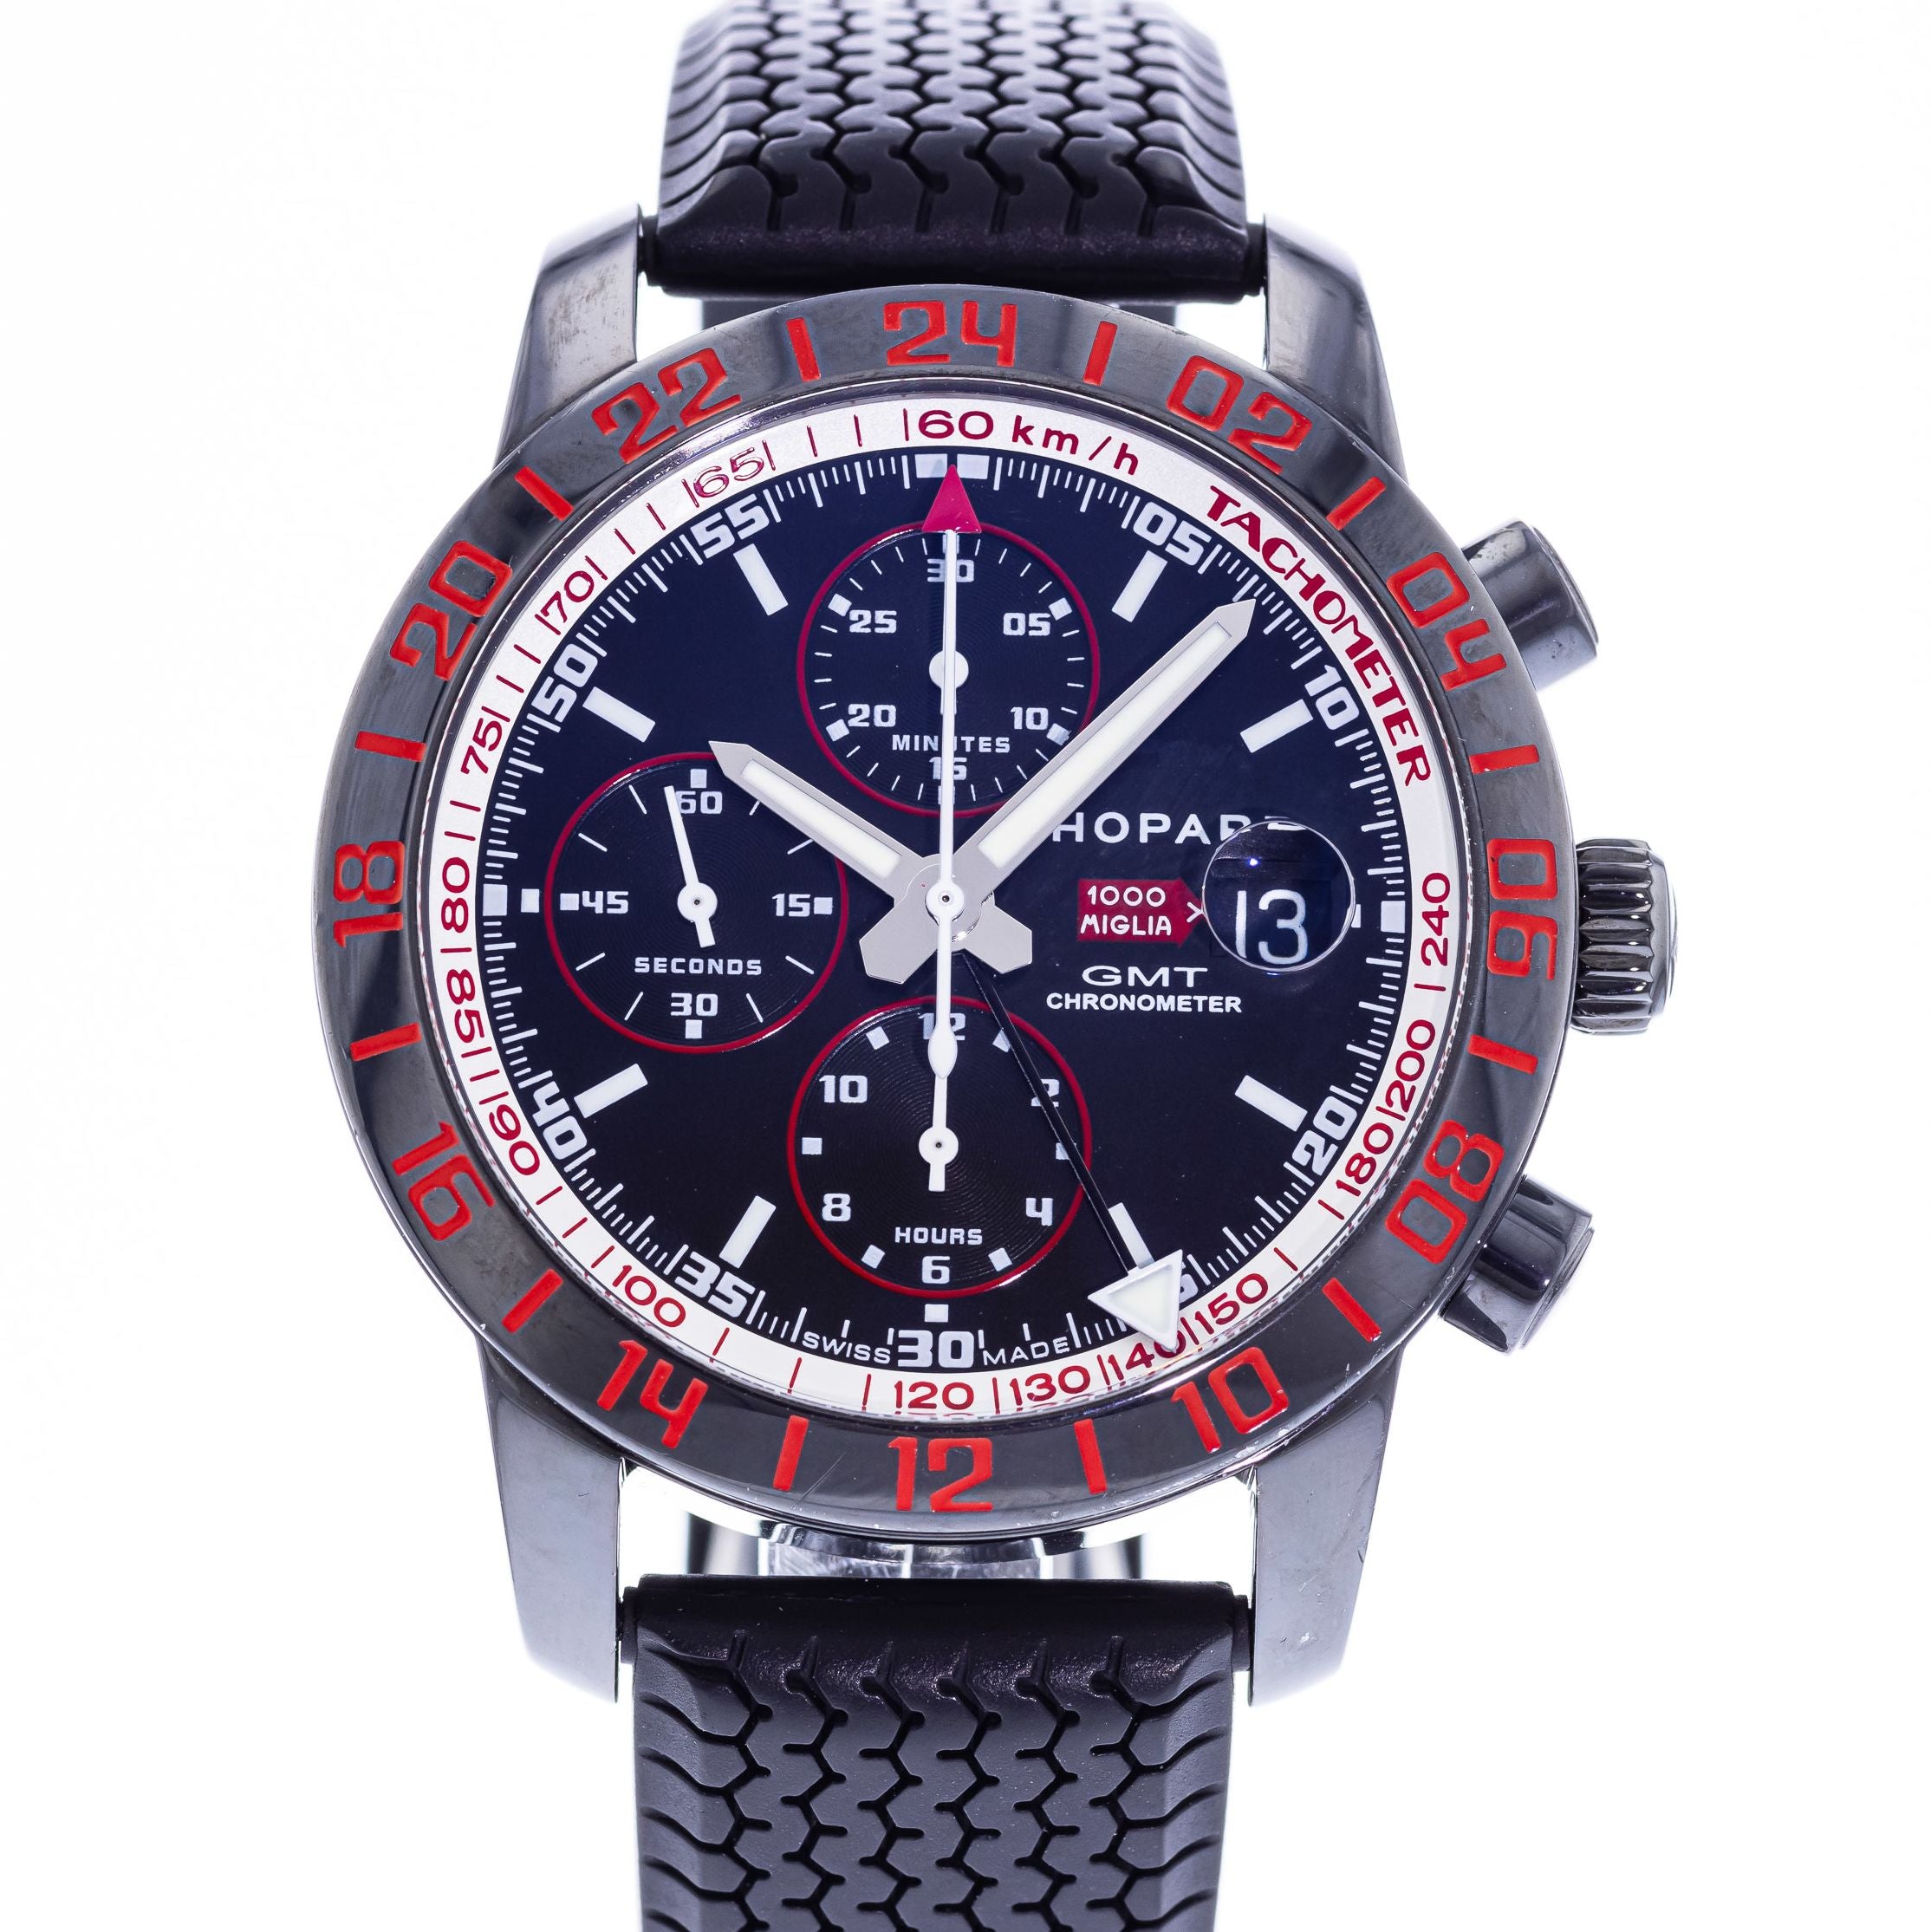 Chopard's Least Expensive Mechanical Watch Is The Mille Miglia